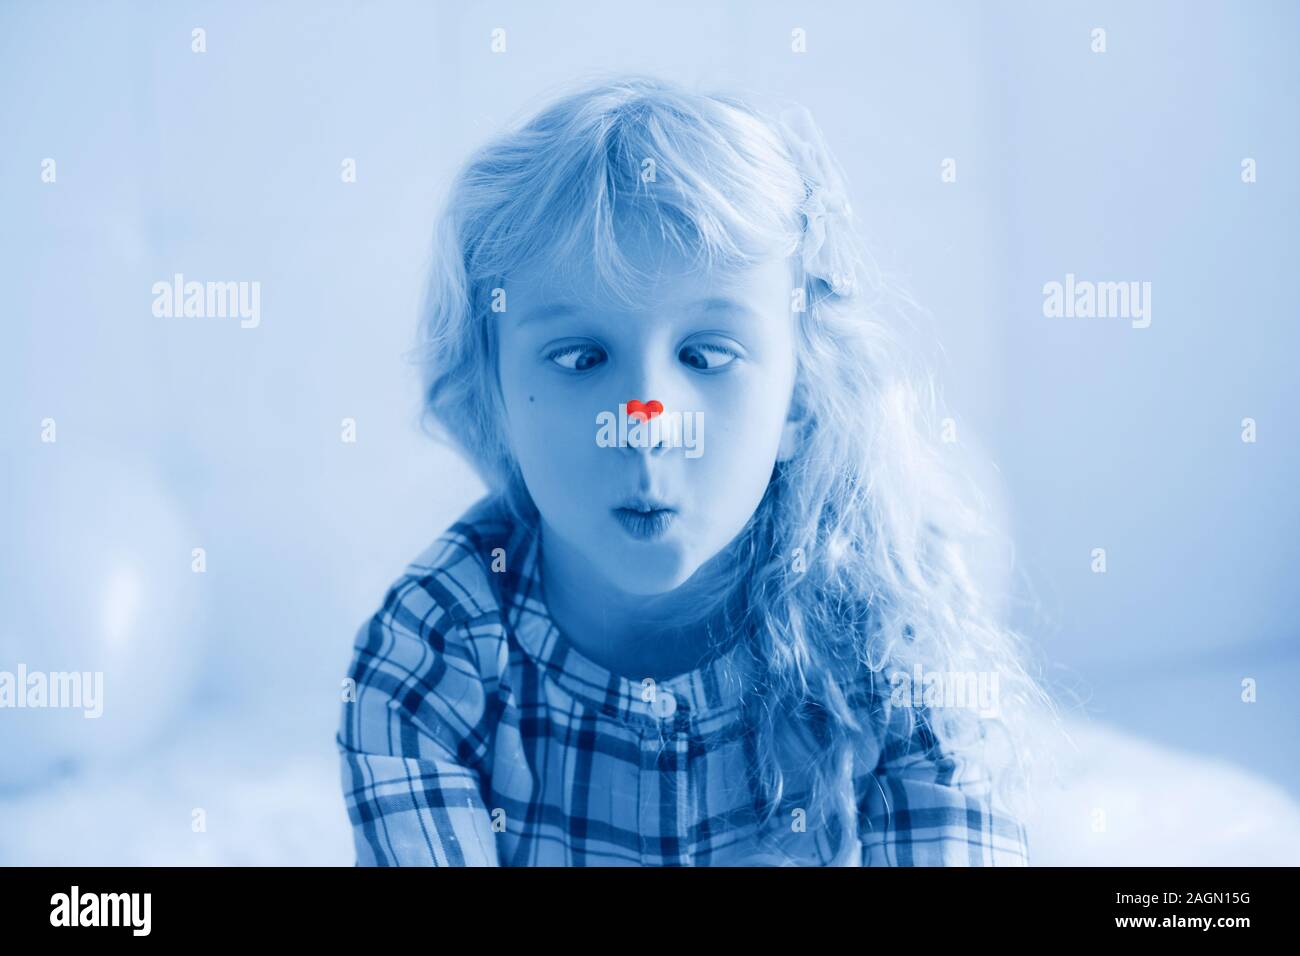 Funny hilarious Caucasian cute adorable child girl looking at her nose with heart sticker on it. Cross-eyed kid squinting eyes. Valentine day holiday Stock Photo